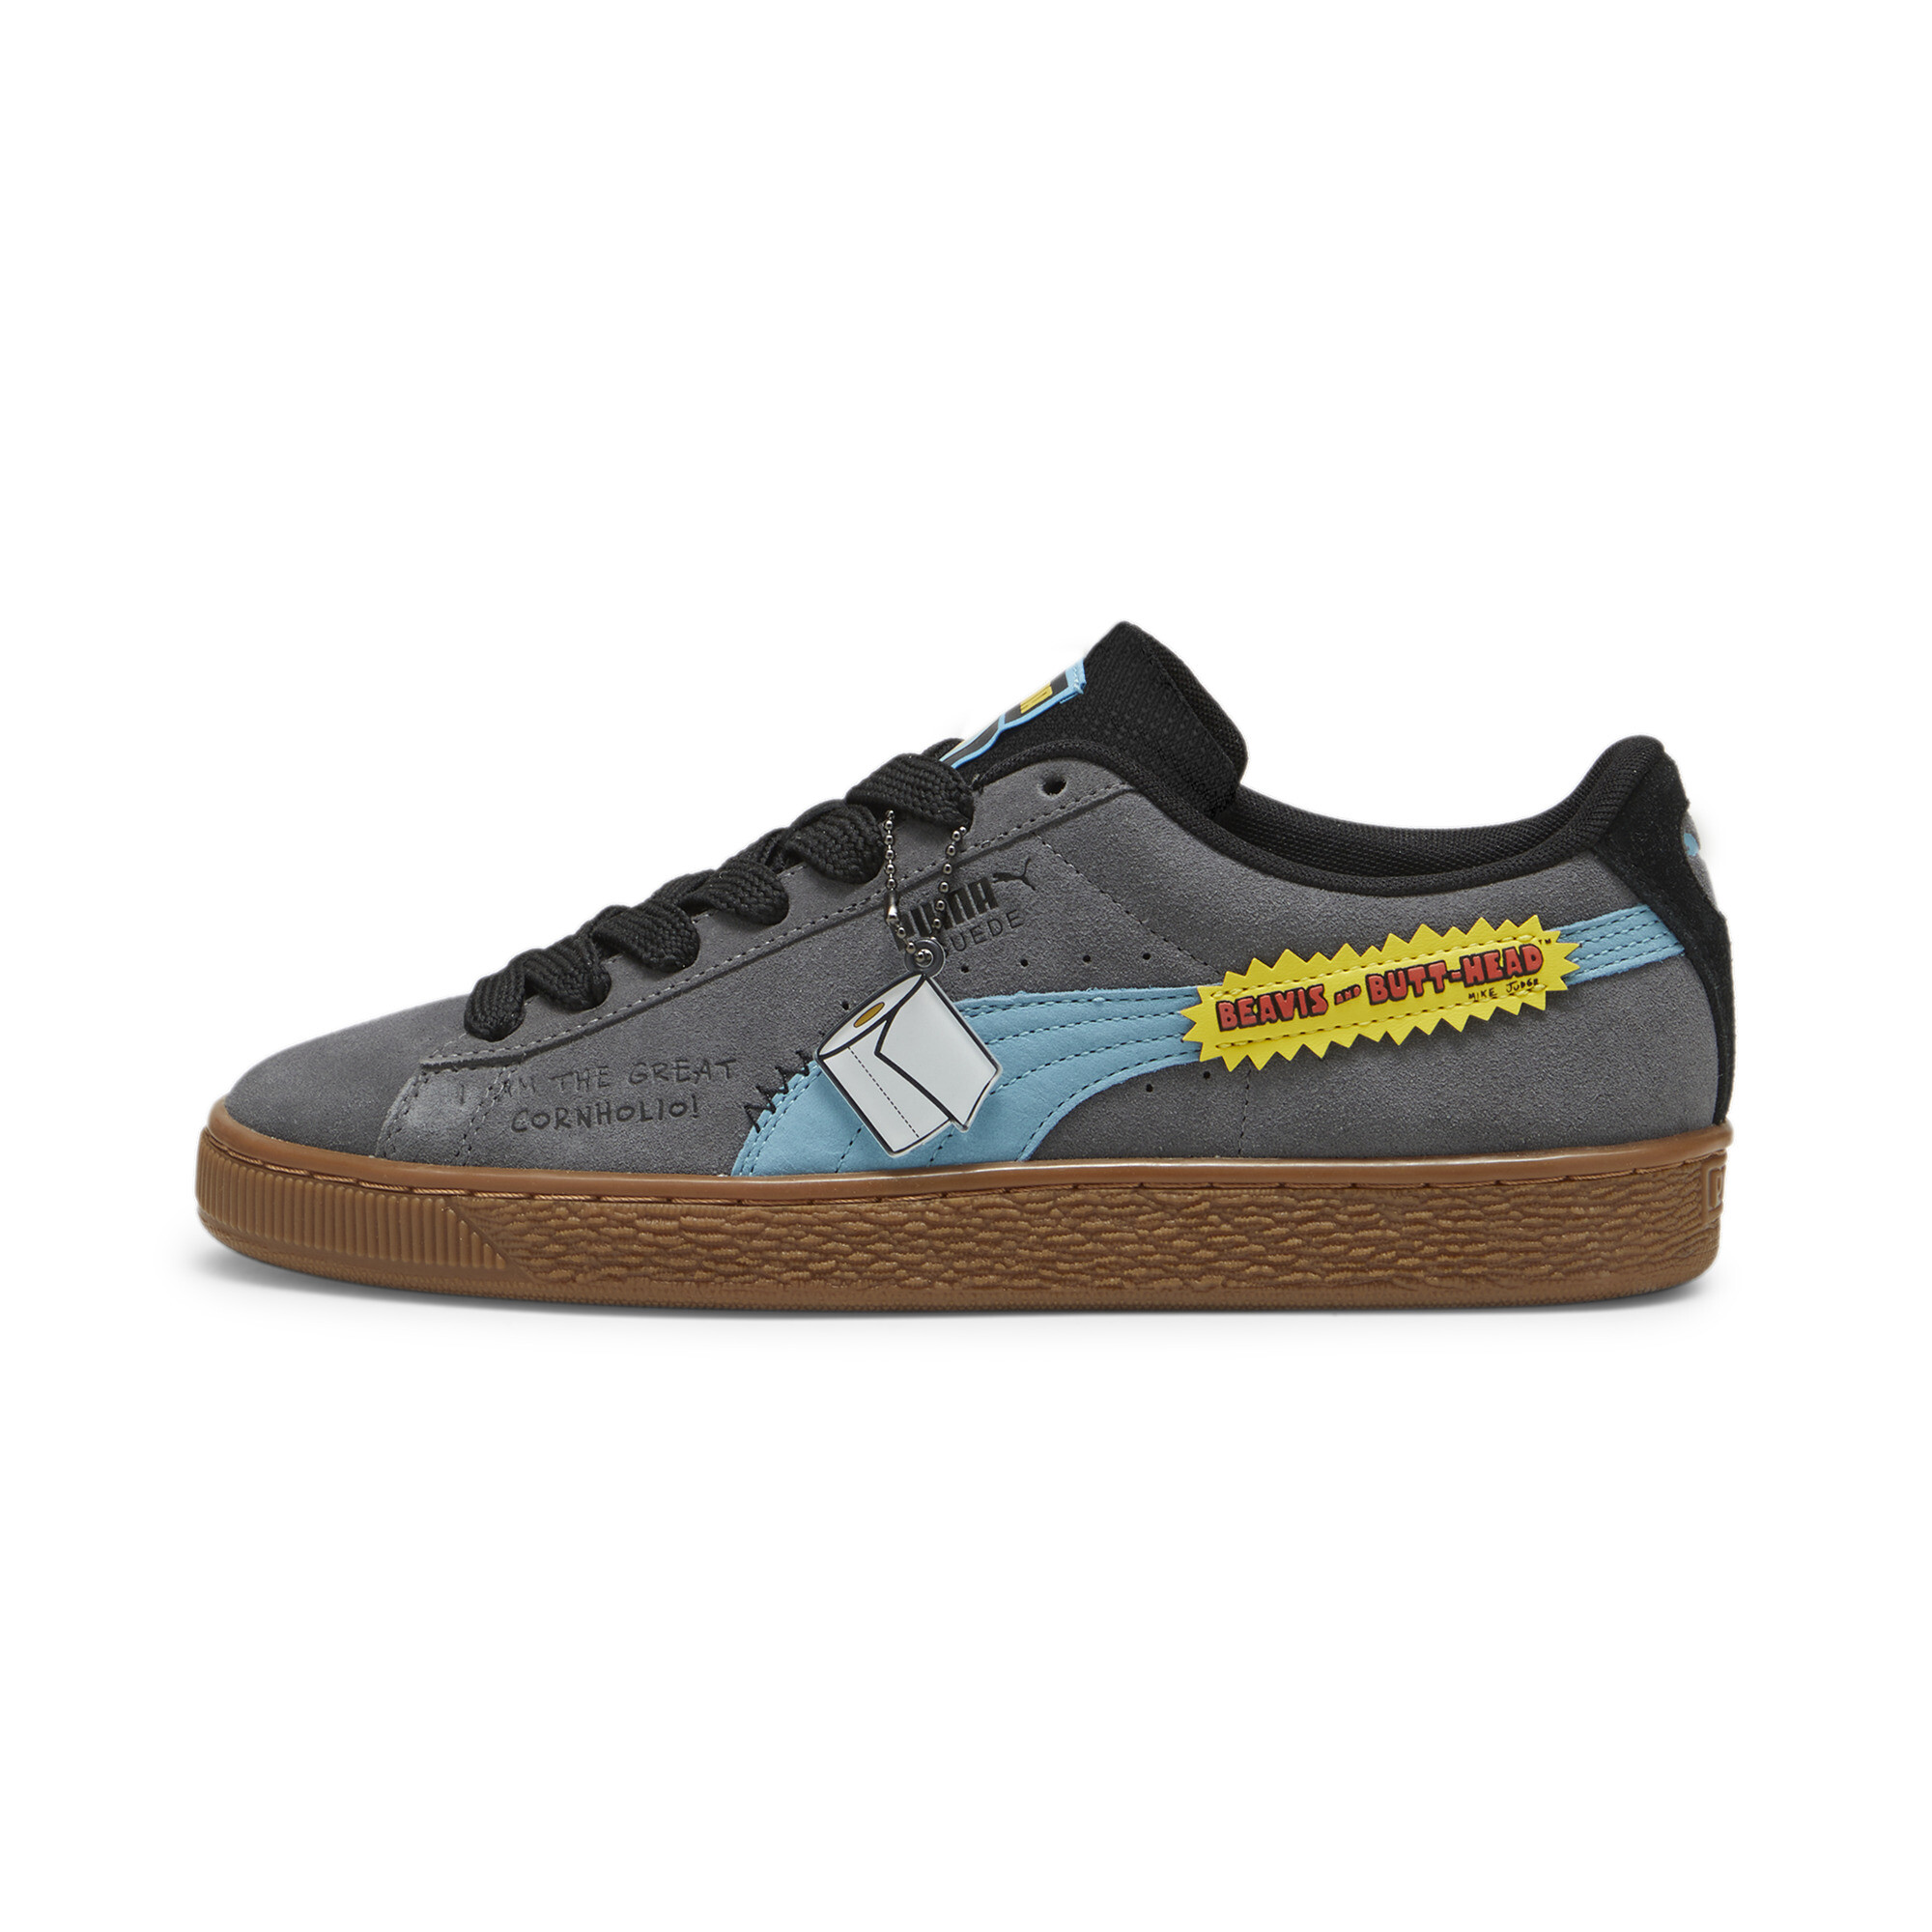 Men's Puma X BEAVIS AND BUTTHEAD Suede Sneakers, Gray, Size 35.5, Shoes